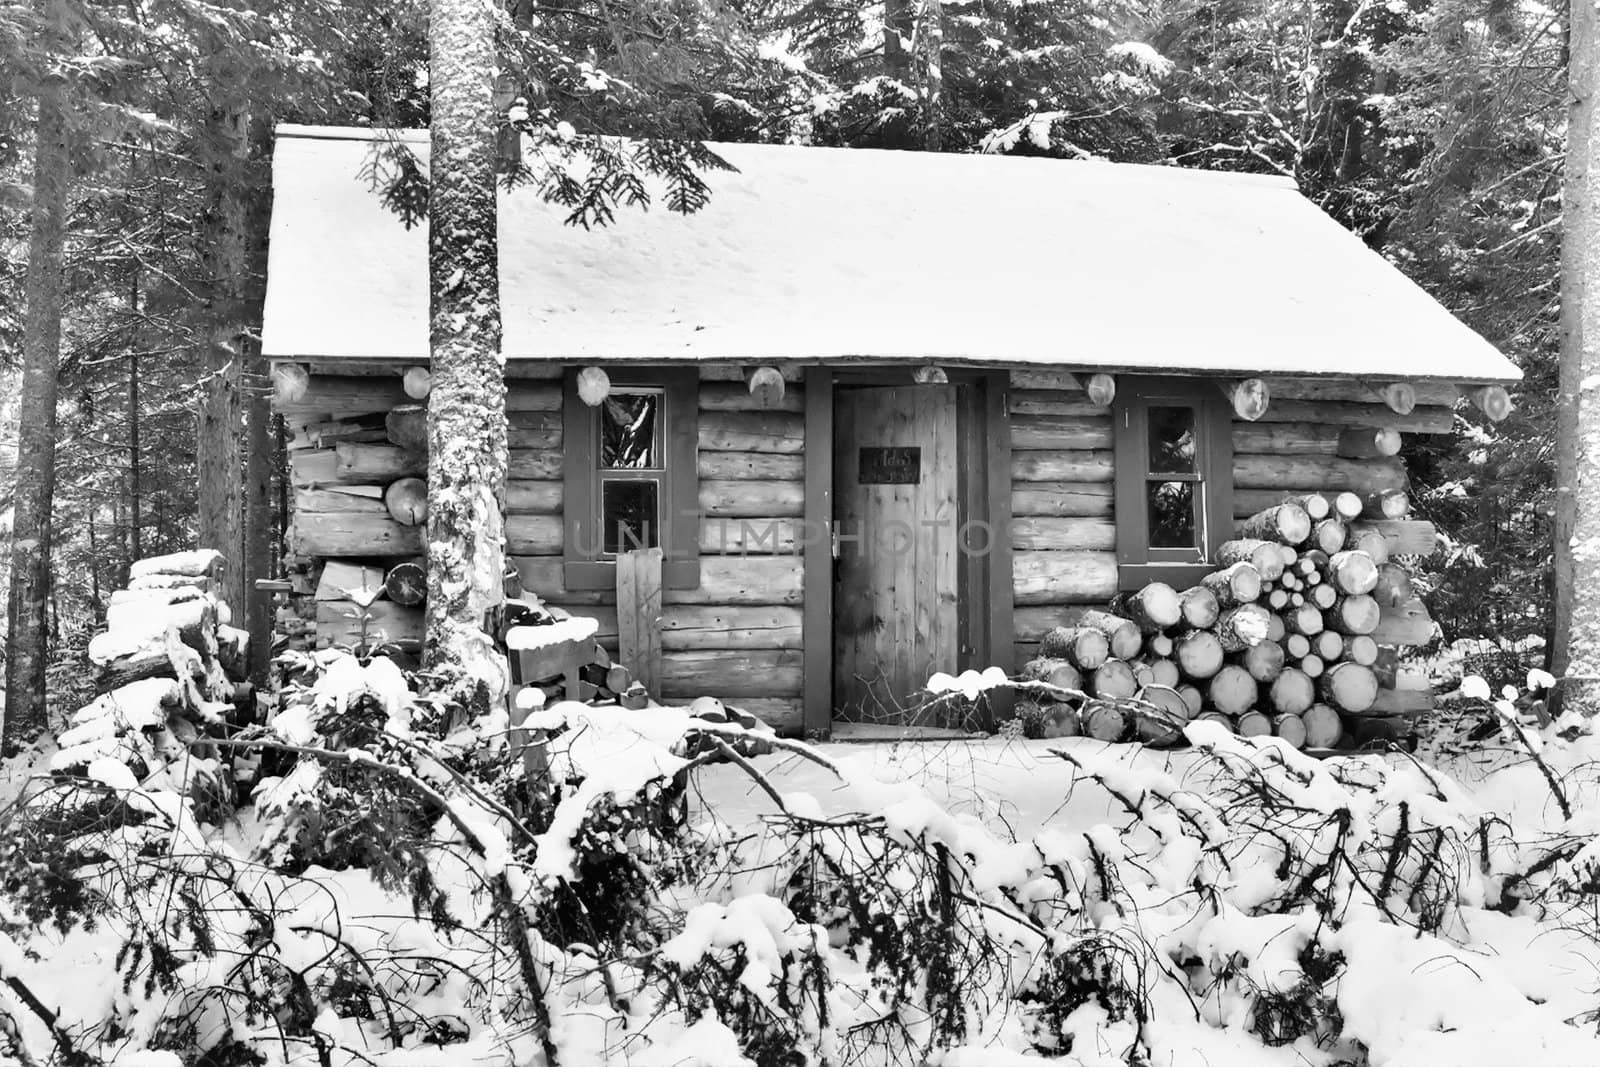  cabin in the woods during the winter,picture shown in black and white